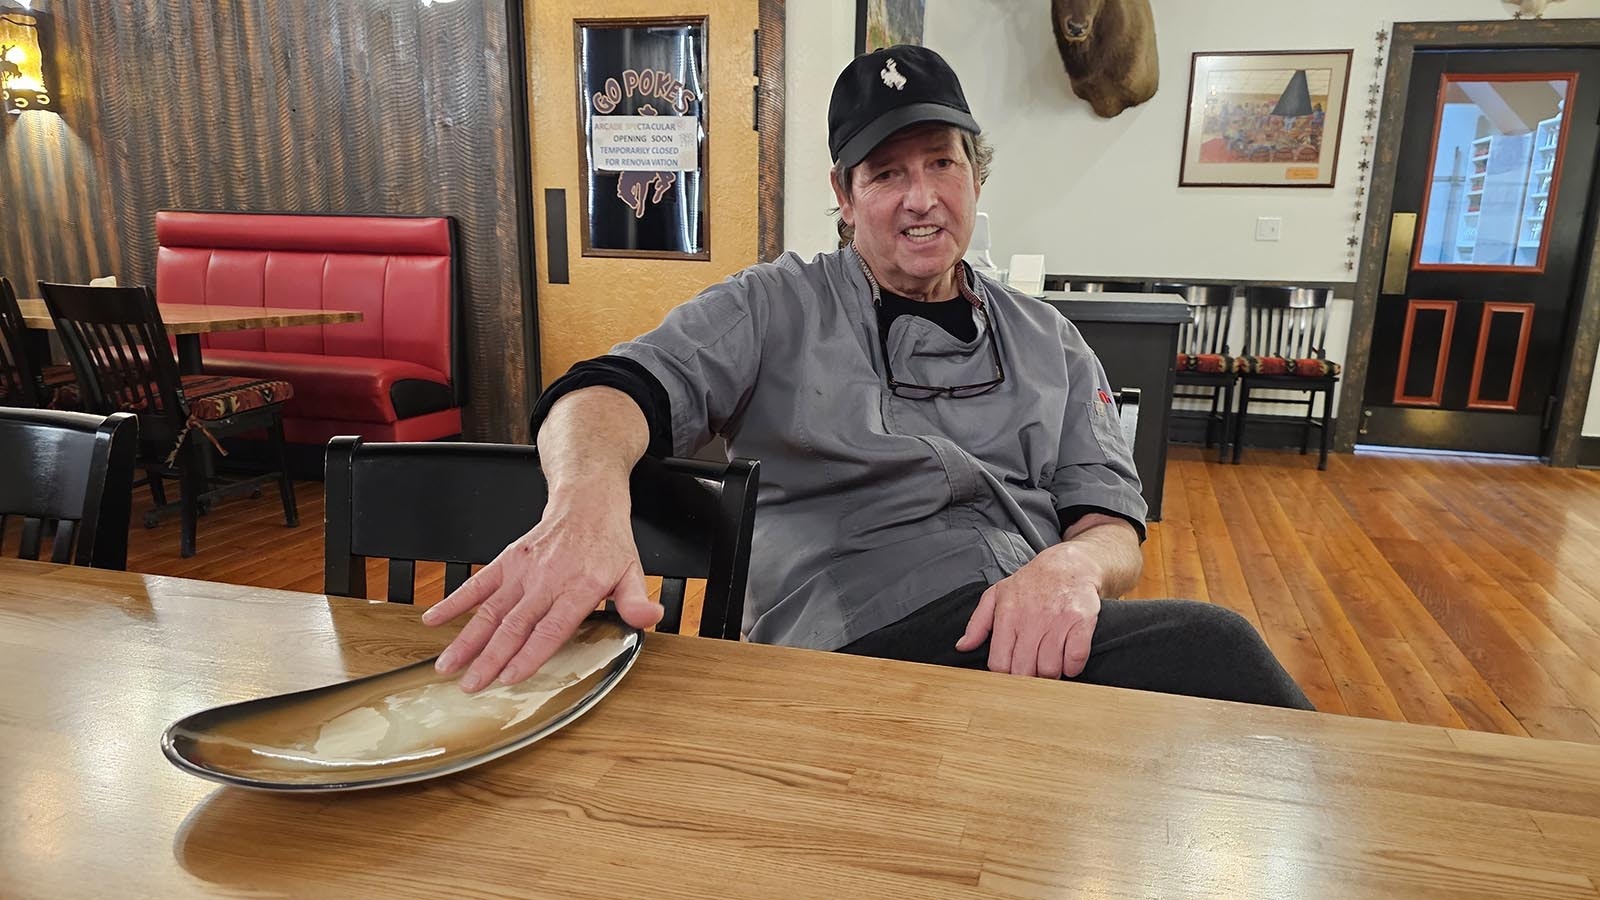 Buck Buchenroth with one of the custom dishes he designed for Stockman's Saloon and Steakhouse.